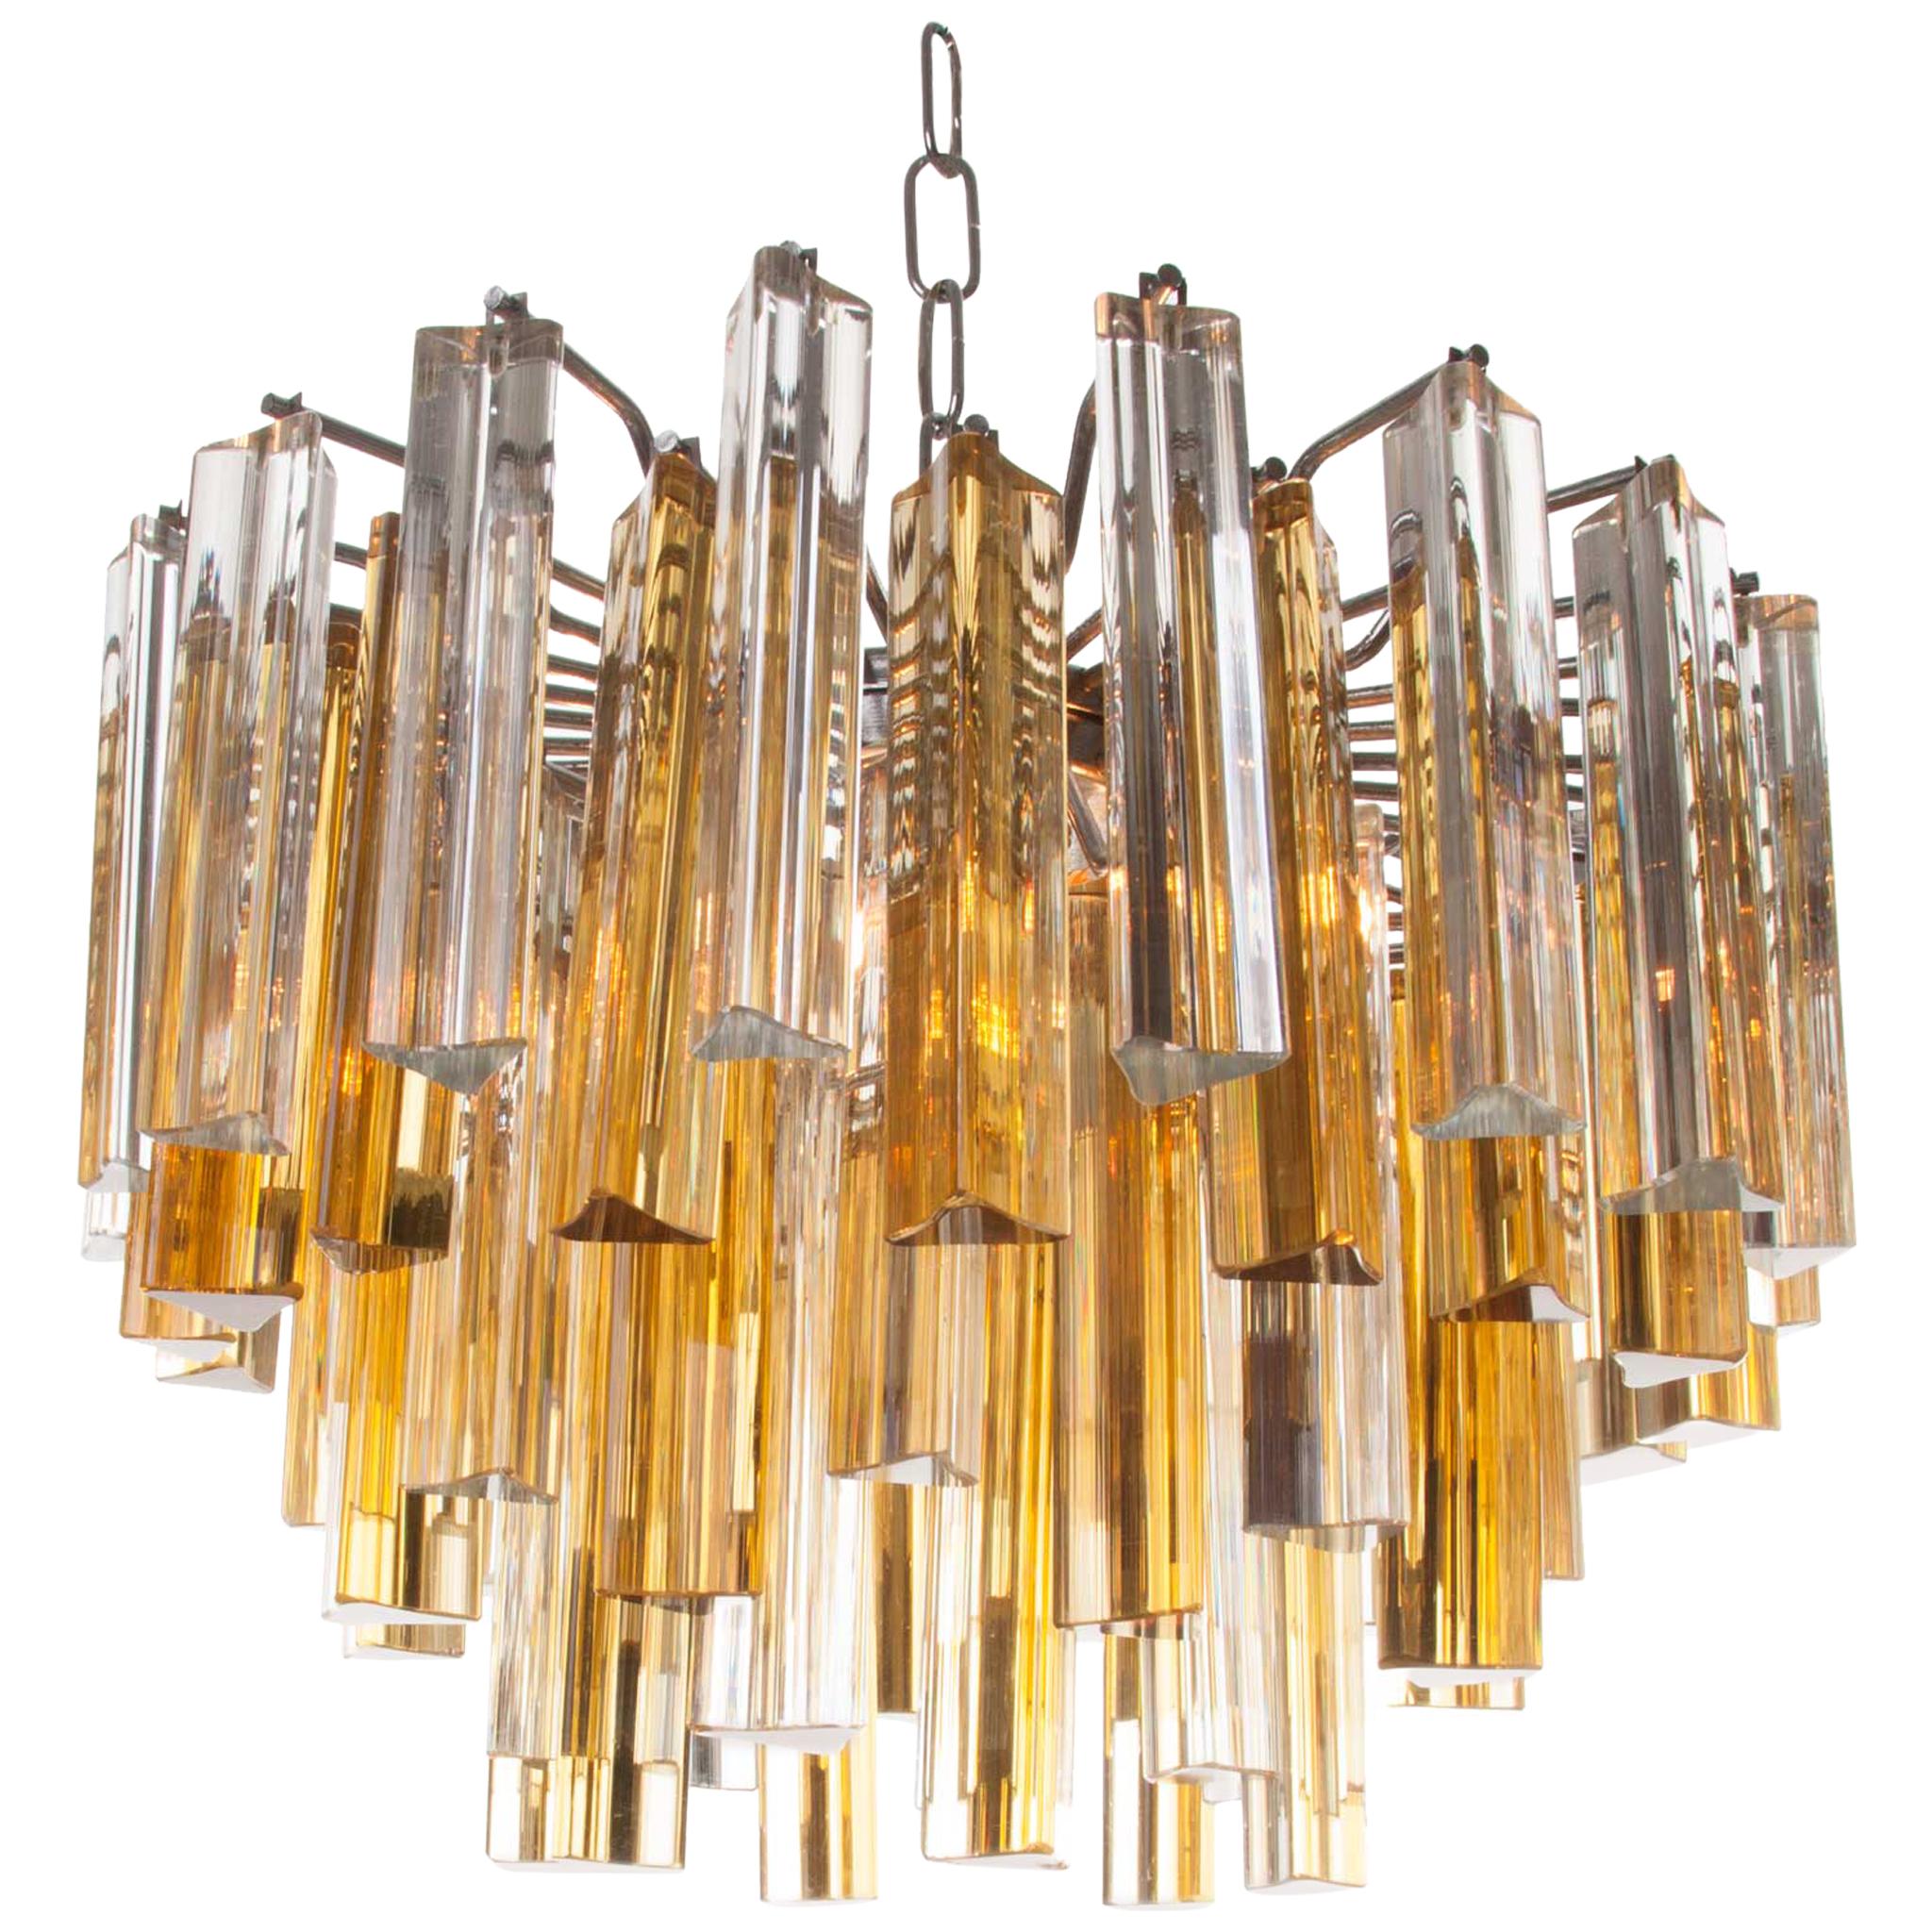 Iconic Italian chandelier Attributed to Venini. This chandelier holds 66 